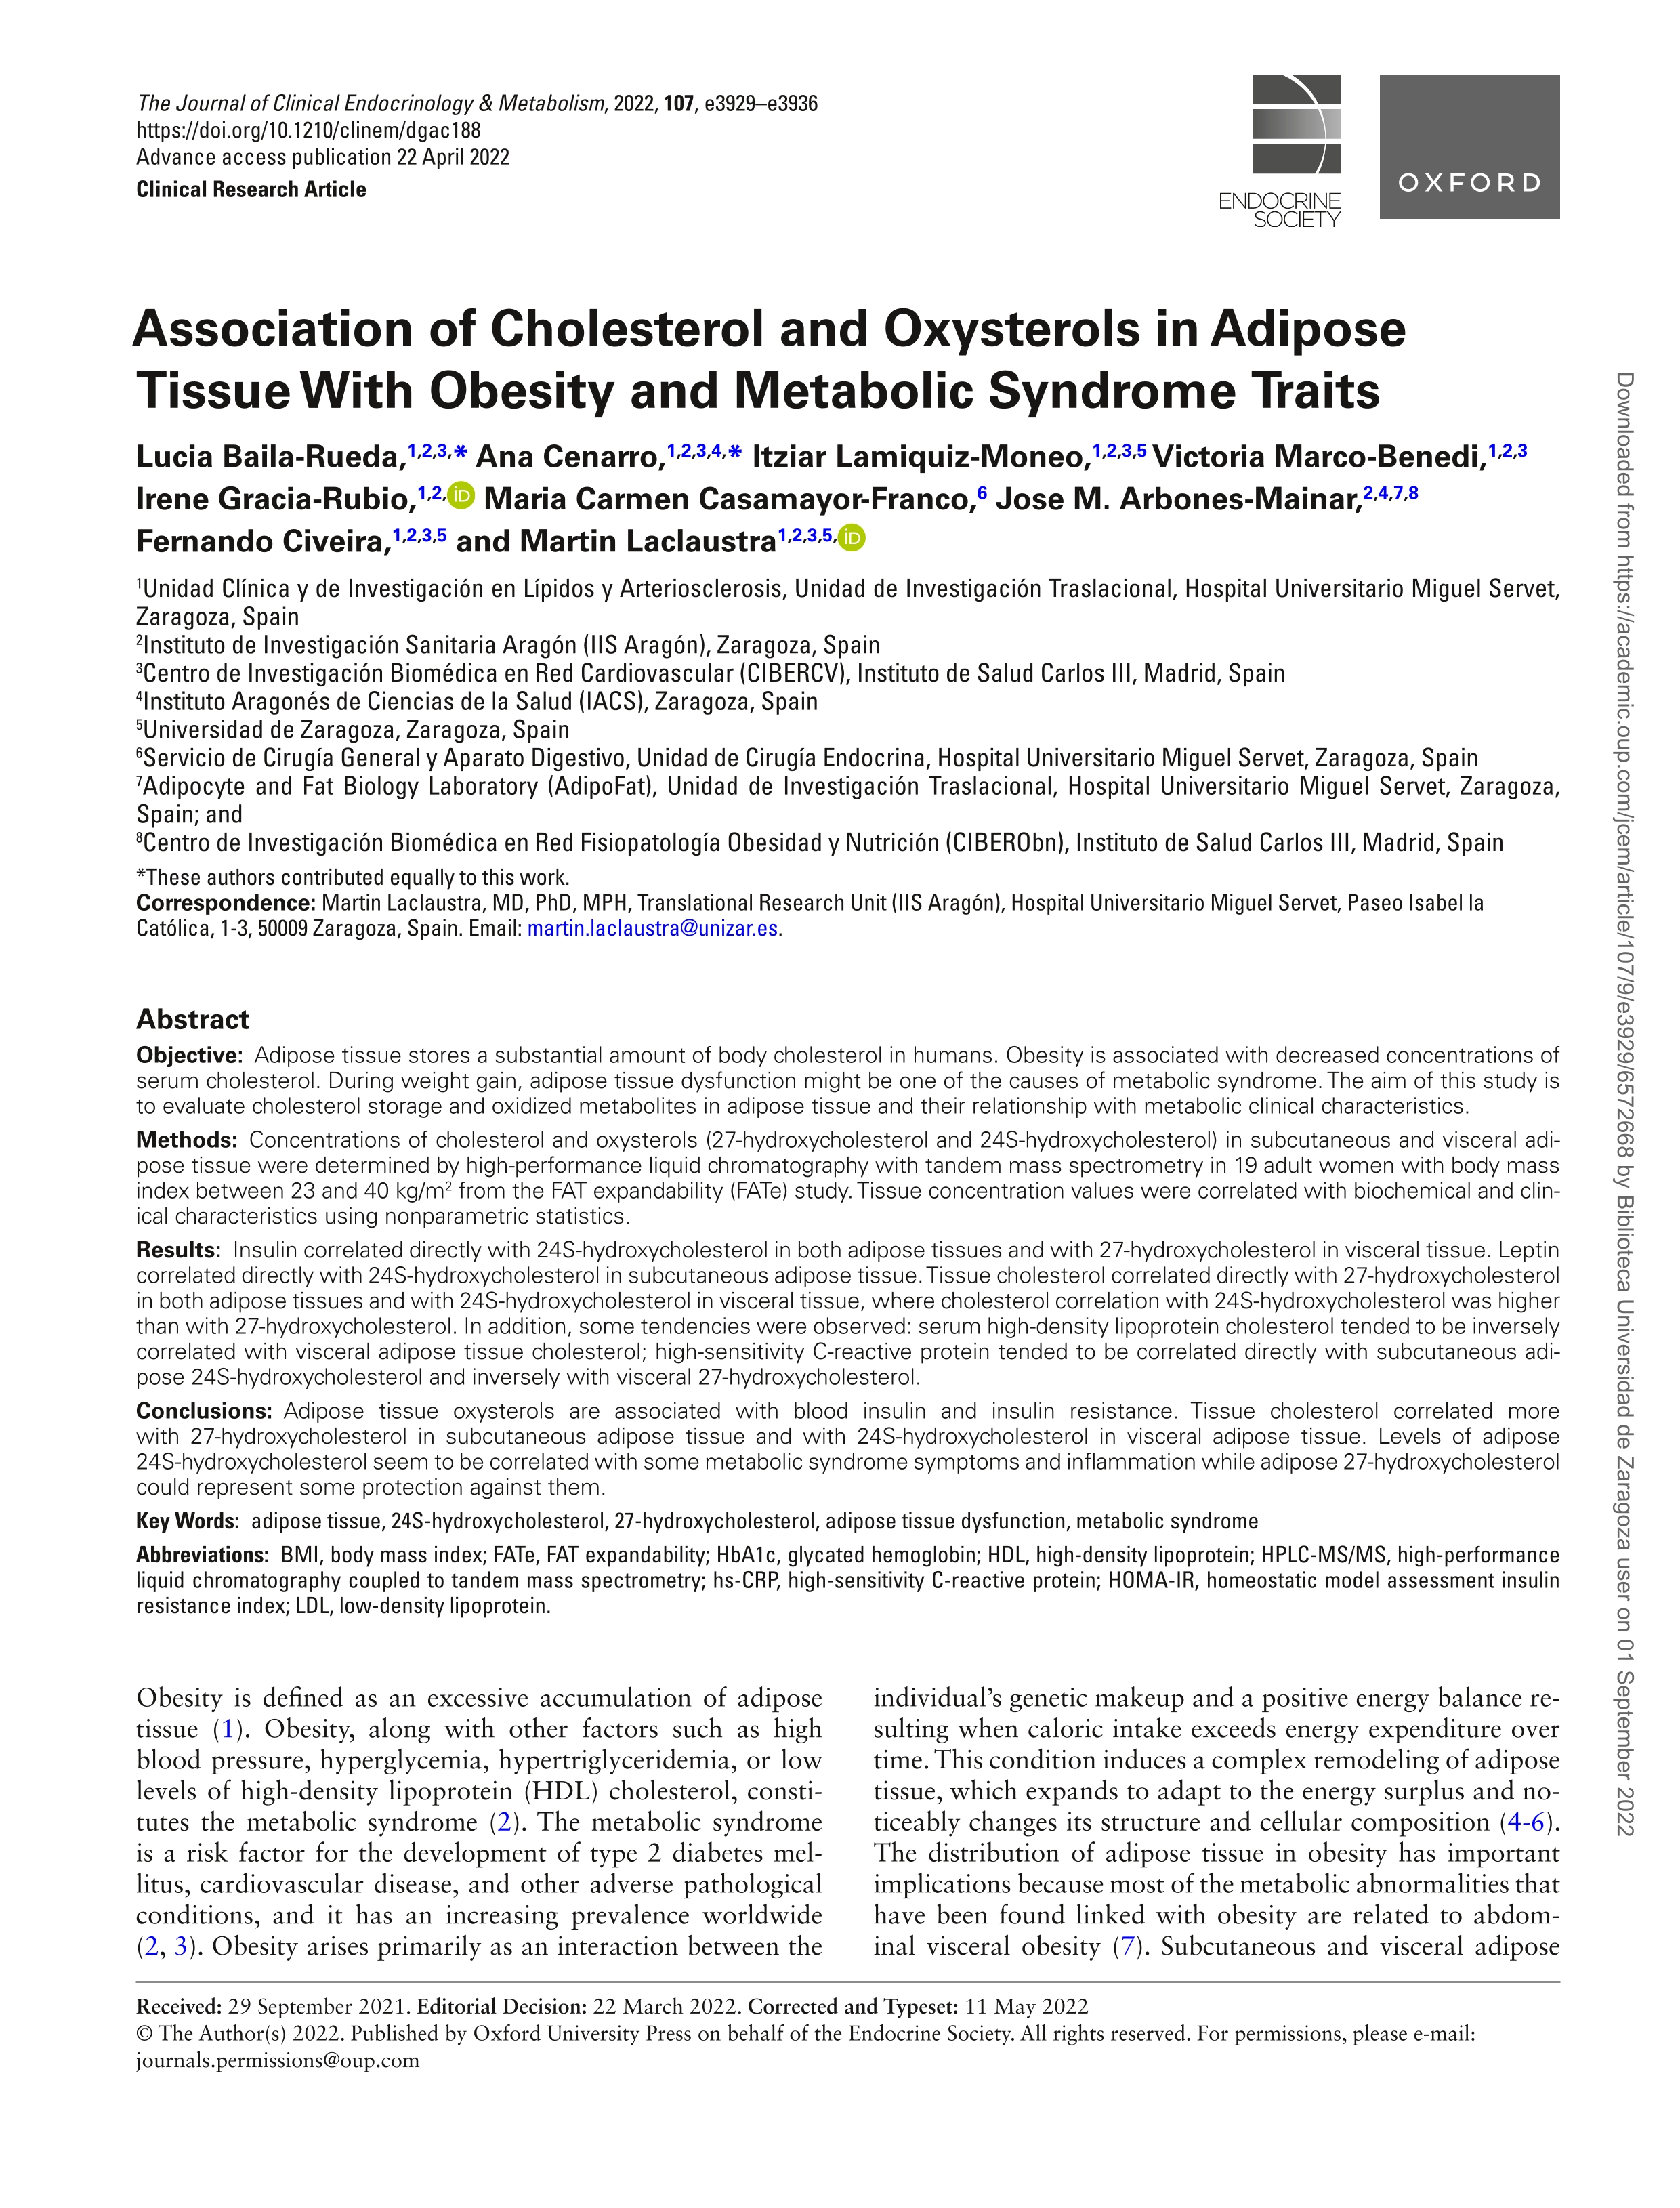 Association of cholesterol and oxysterols in adipose tissue with obesity and metabolic syndrome traits